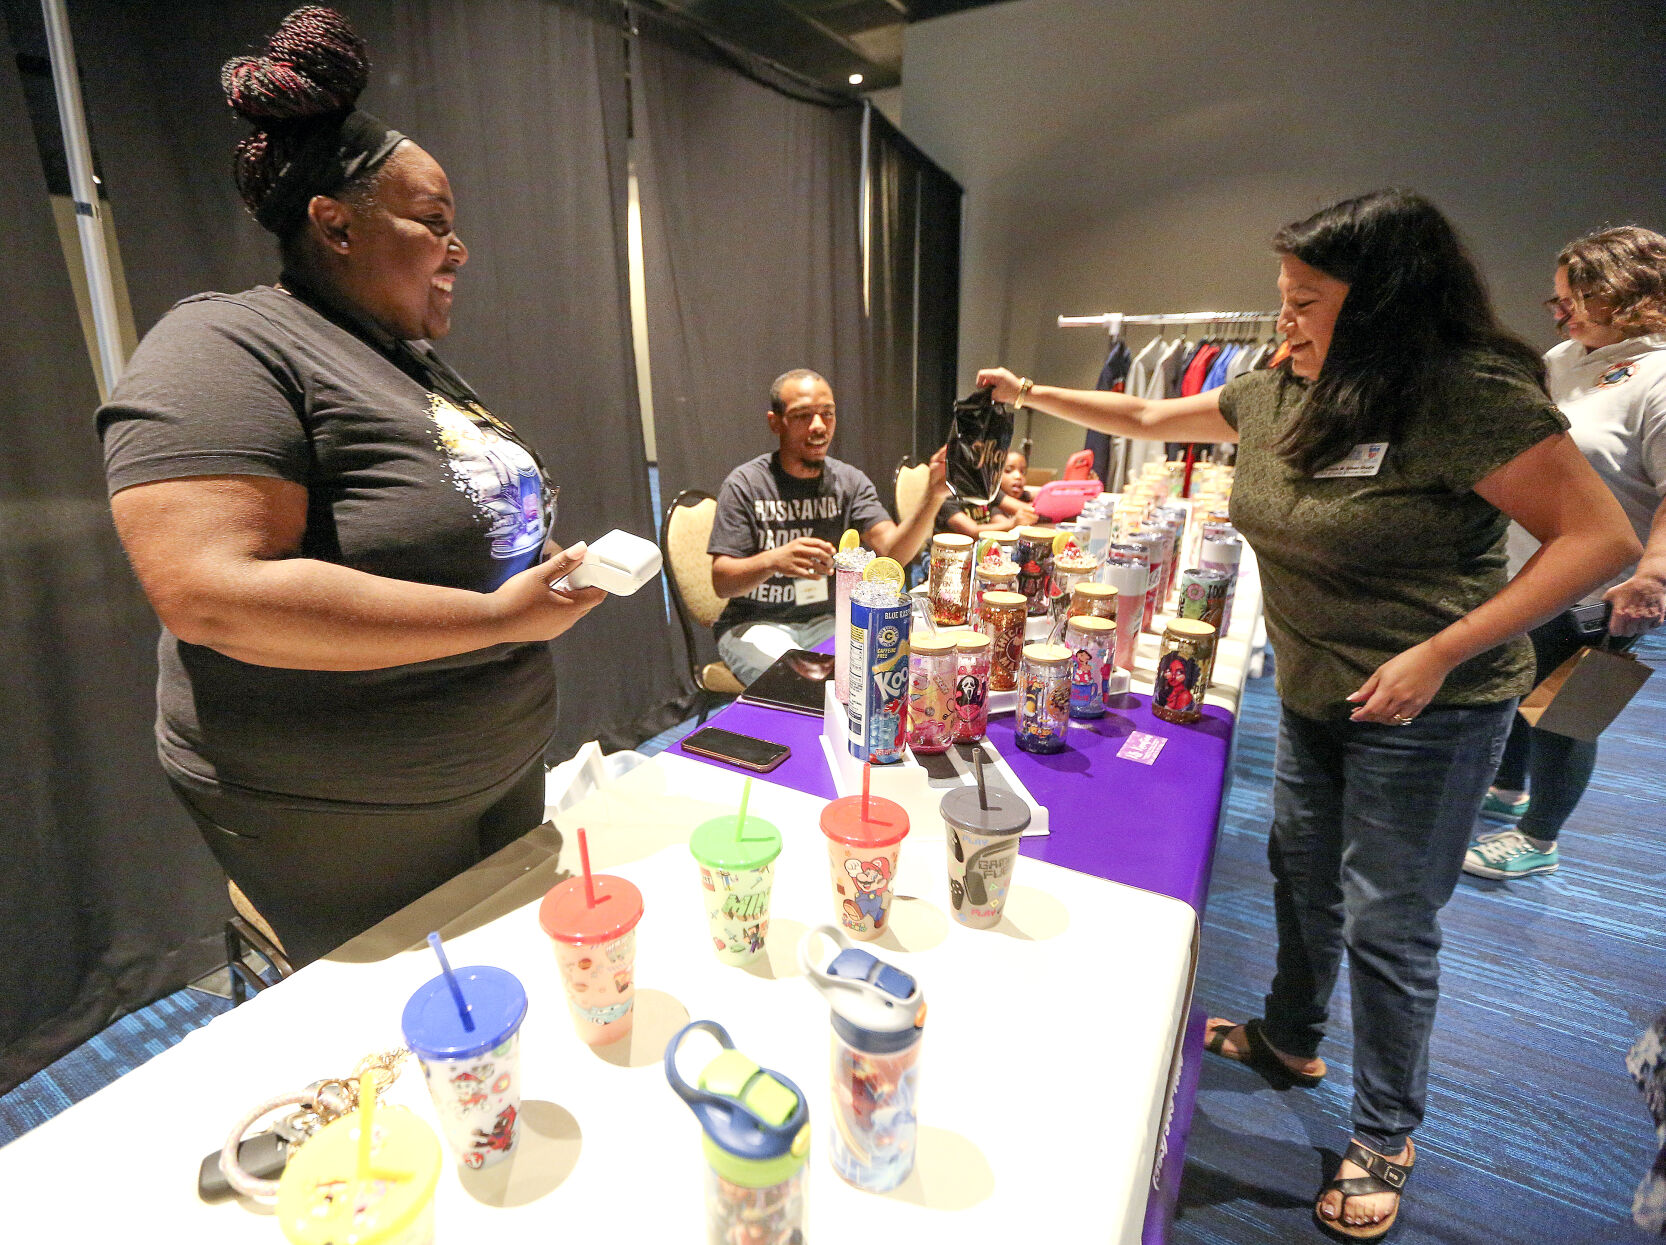 Chief of Equity and Human Rights for the City of Dubuque Dr. Gisella Aitken-Shadle (right) talks with Tika Sykes, owner of KLS Kreation during the 3rd Annual Black Business Expo held at the Q Casino in 2023.    PHOTO CREDIT: File photo